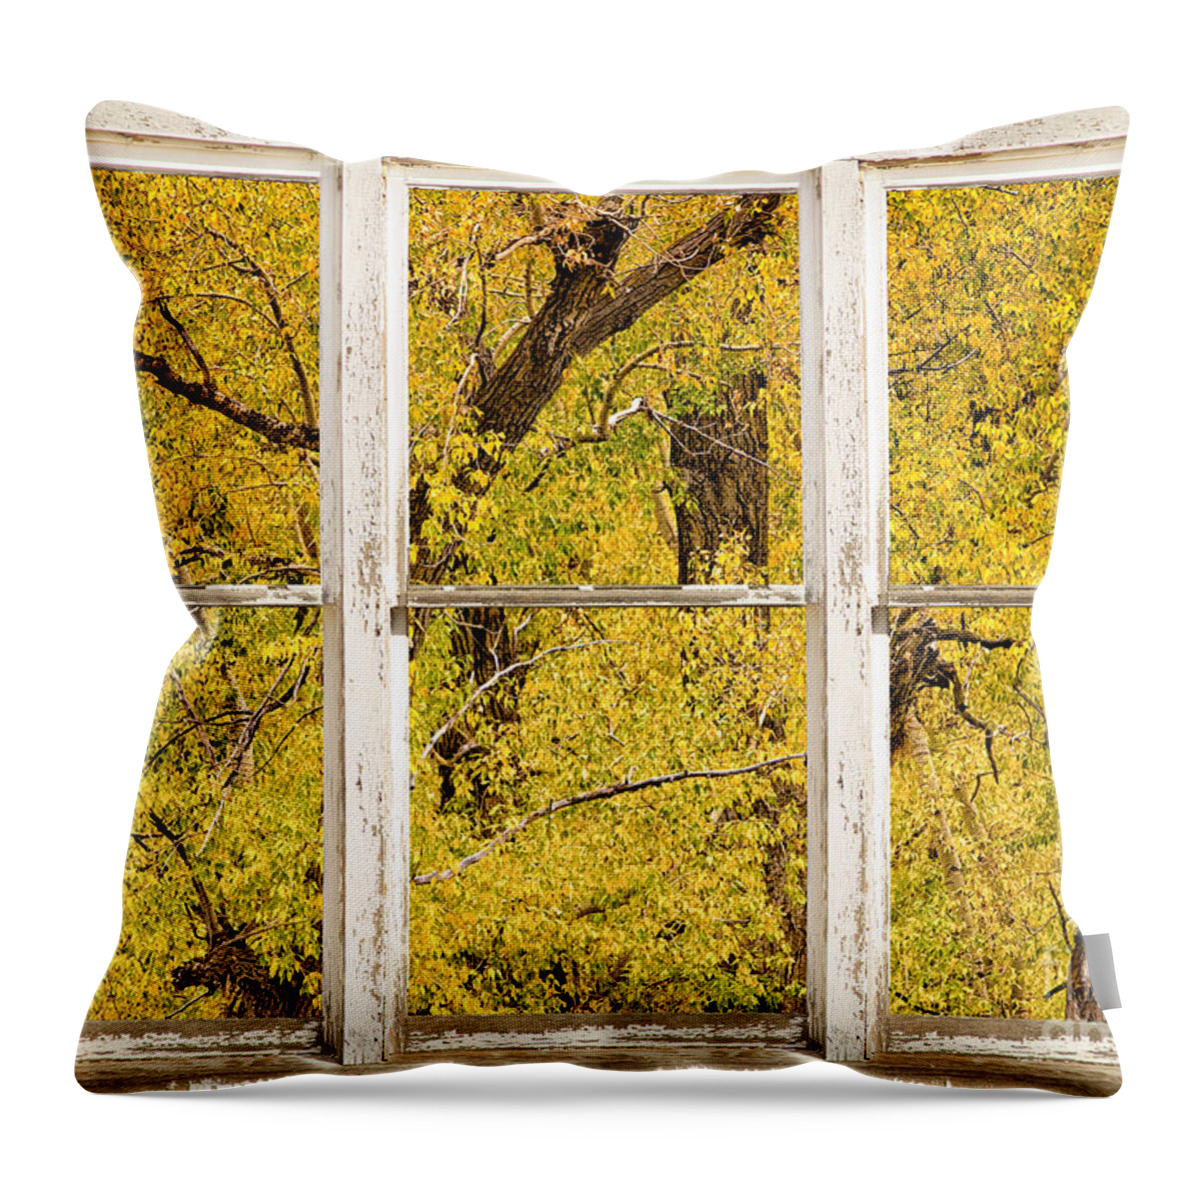 Window Throw Pillow featuring the photograph Cottonwood Fall Foliage Colors Rustic Farm Window View by James BO Insogna